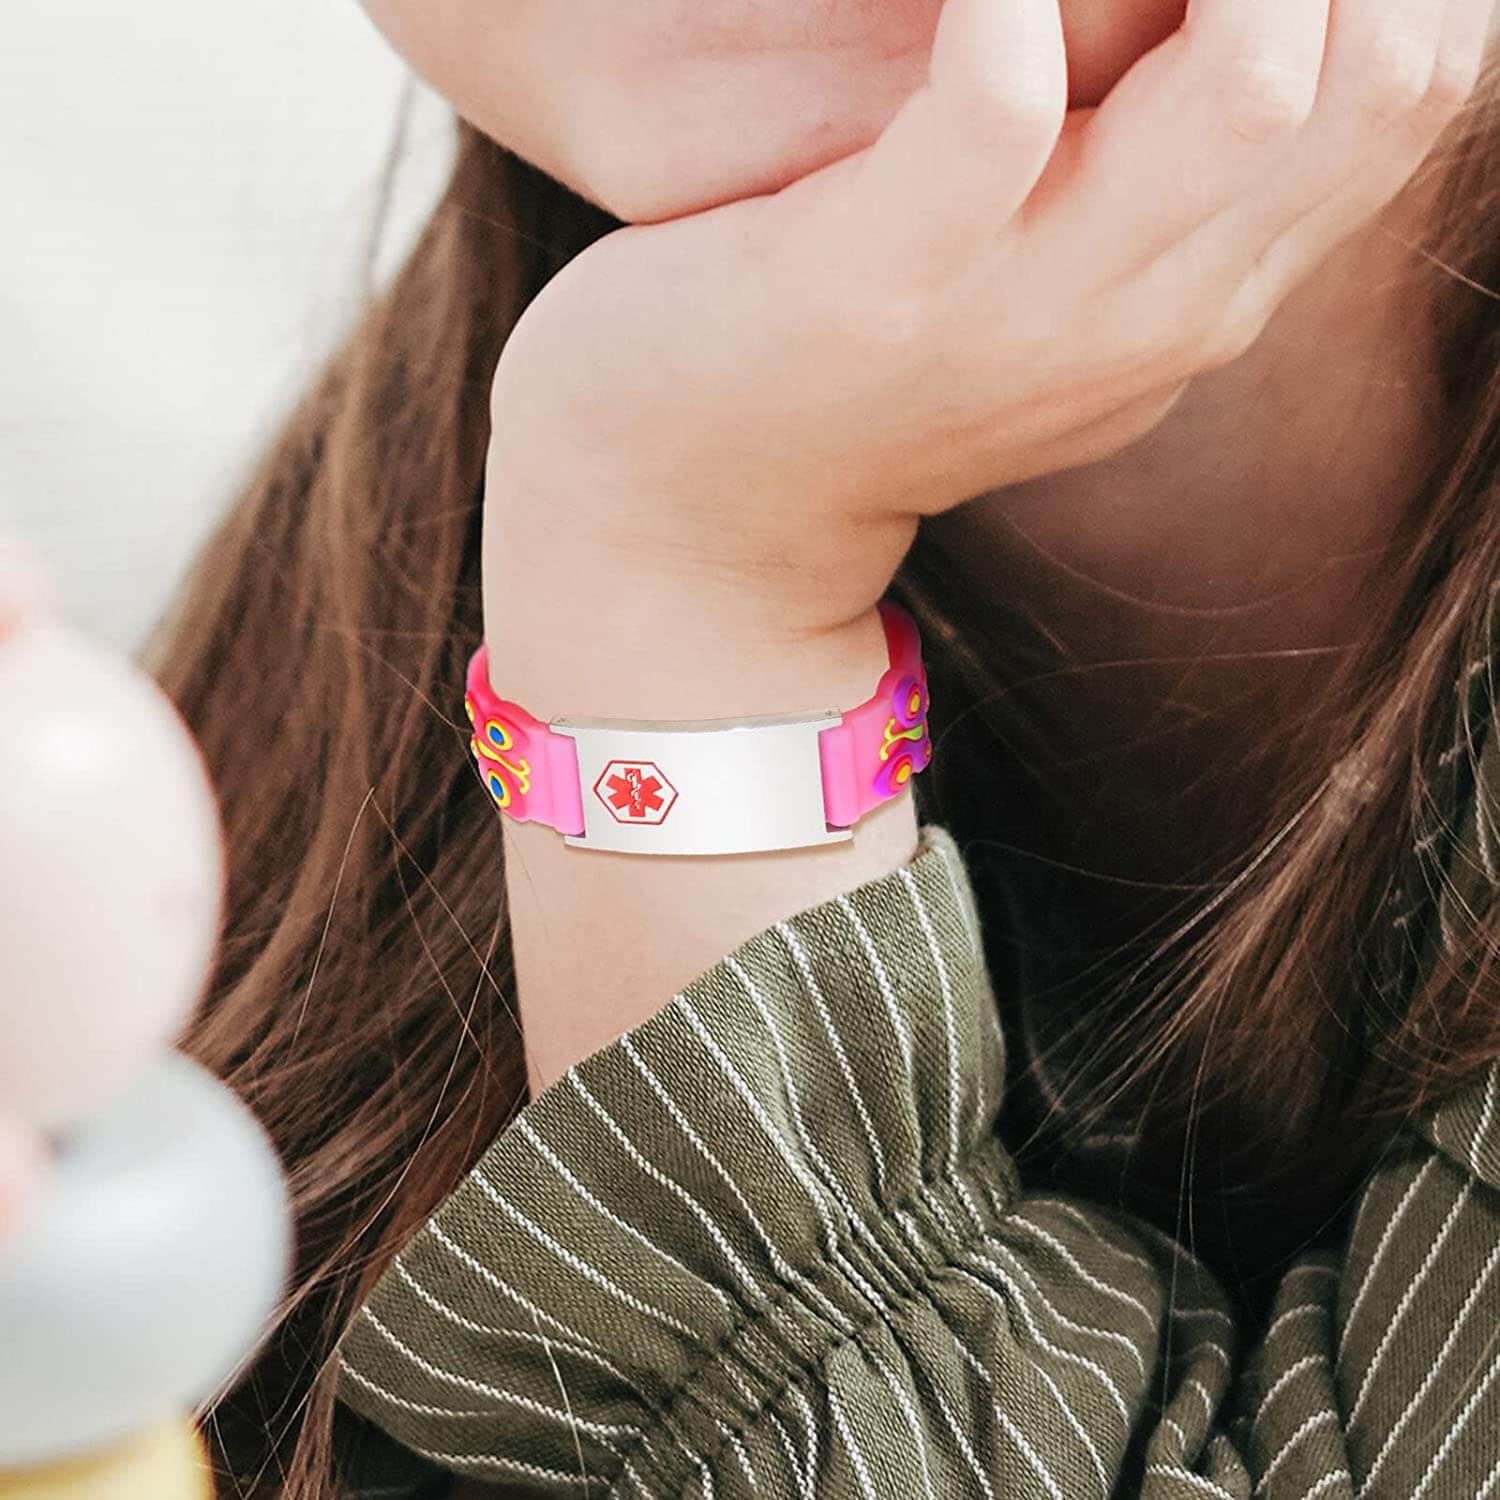 Child wearing child medical alert bracelet. Bracelet band is made of pink silicone with a butterfly design. The alert plate is a stainless steel with red medi-alert symbol engraved on the plate.